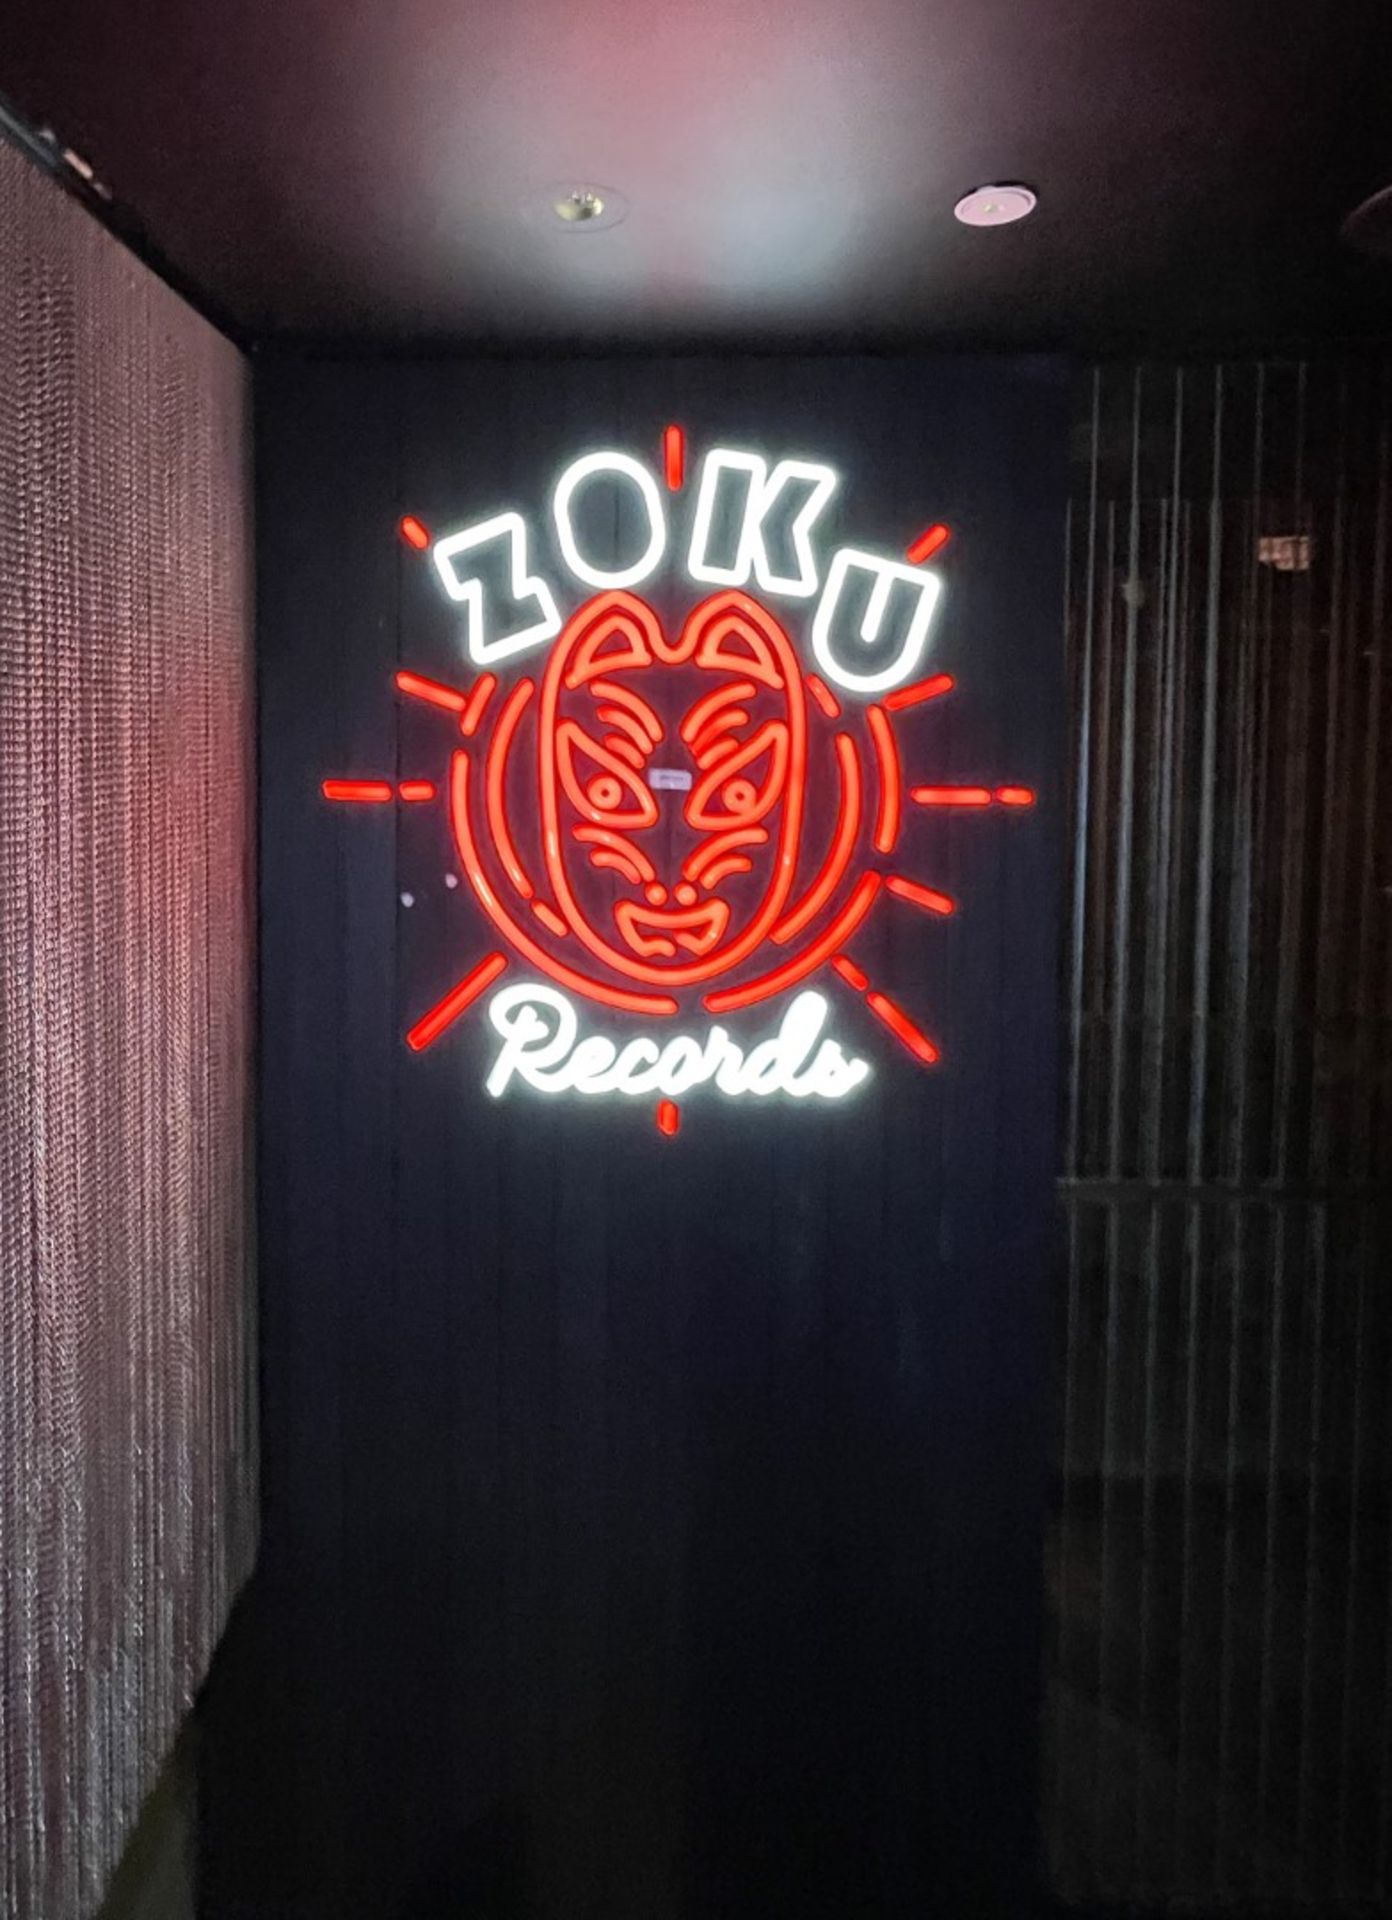 1 x RED NEON Illuminated Wall Sign ZOKU RECORDS Mounted on a Black Wooden Wall Panel - Image 2 of 5